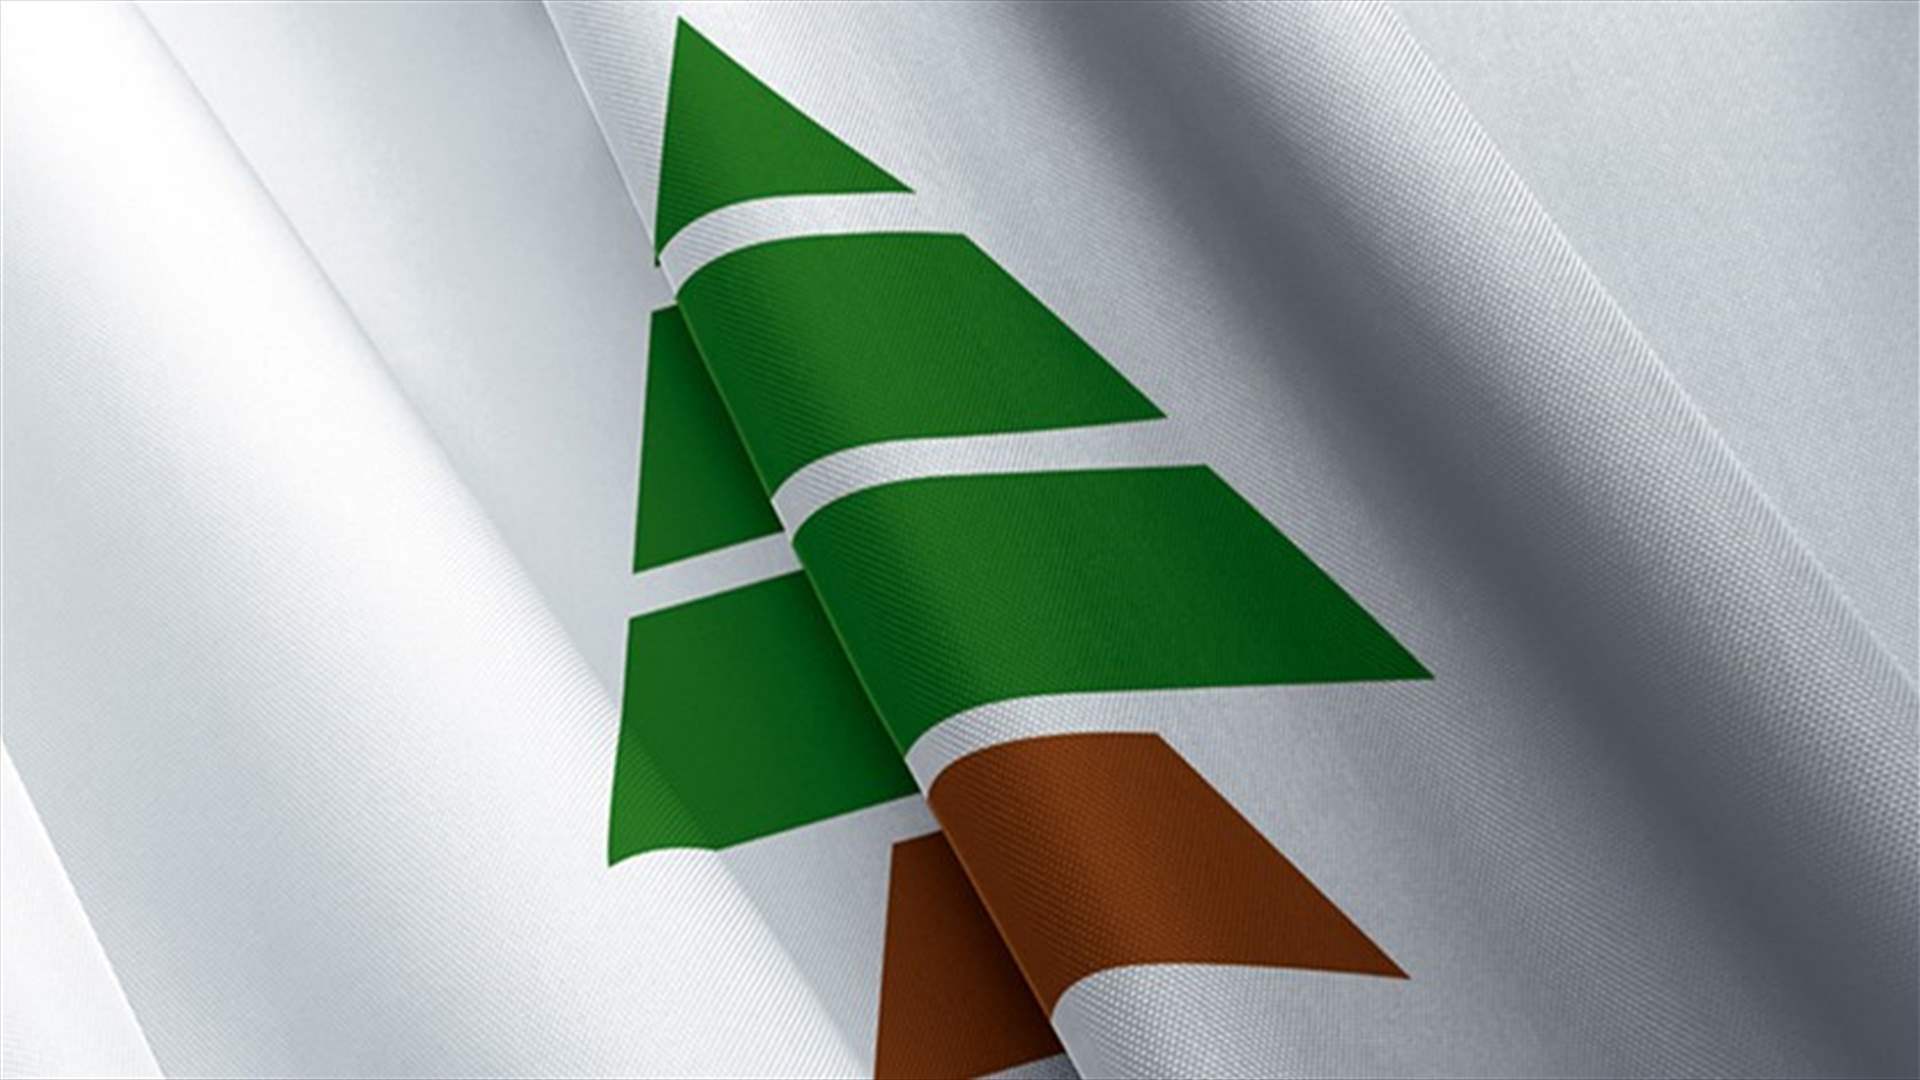 Kataeb Party warns: Lebanon pays &#39;high costs&#39; in political &#39;tug-of-war&#39;